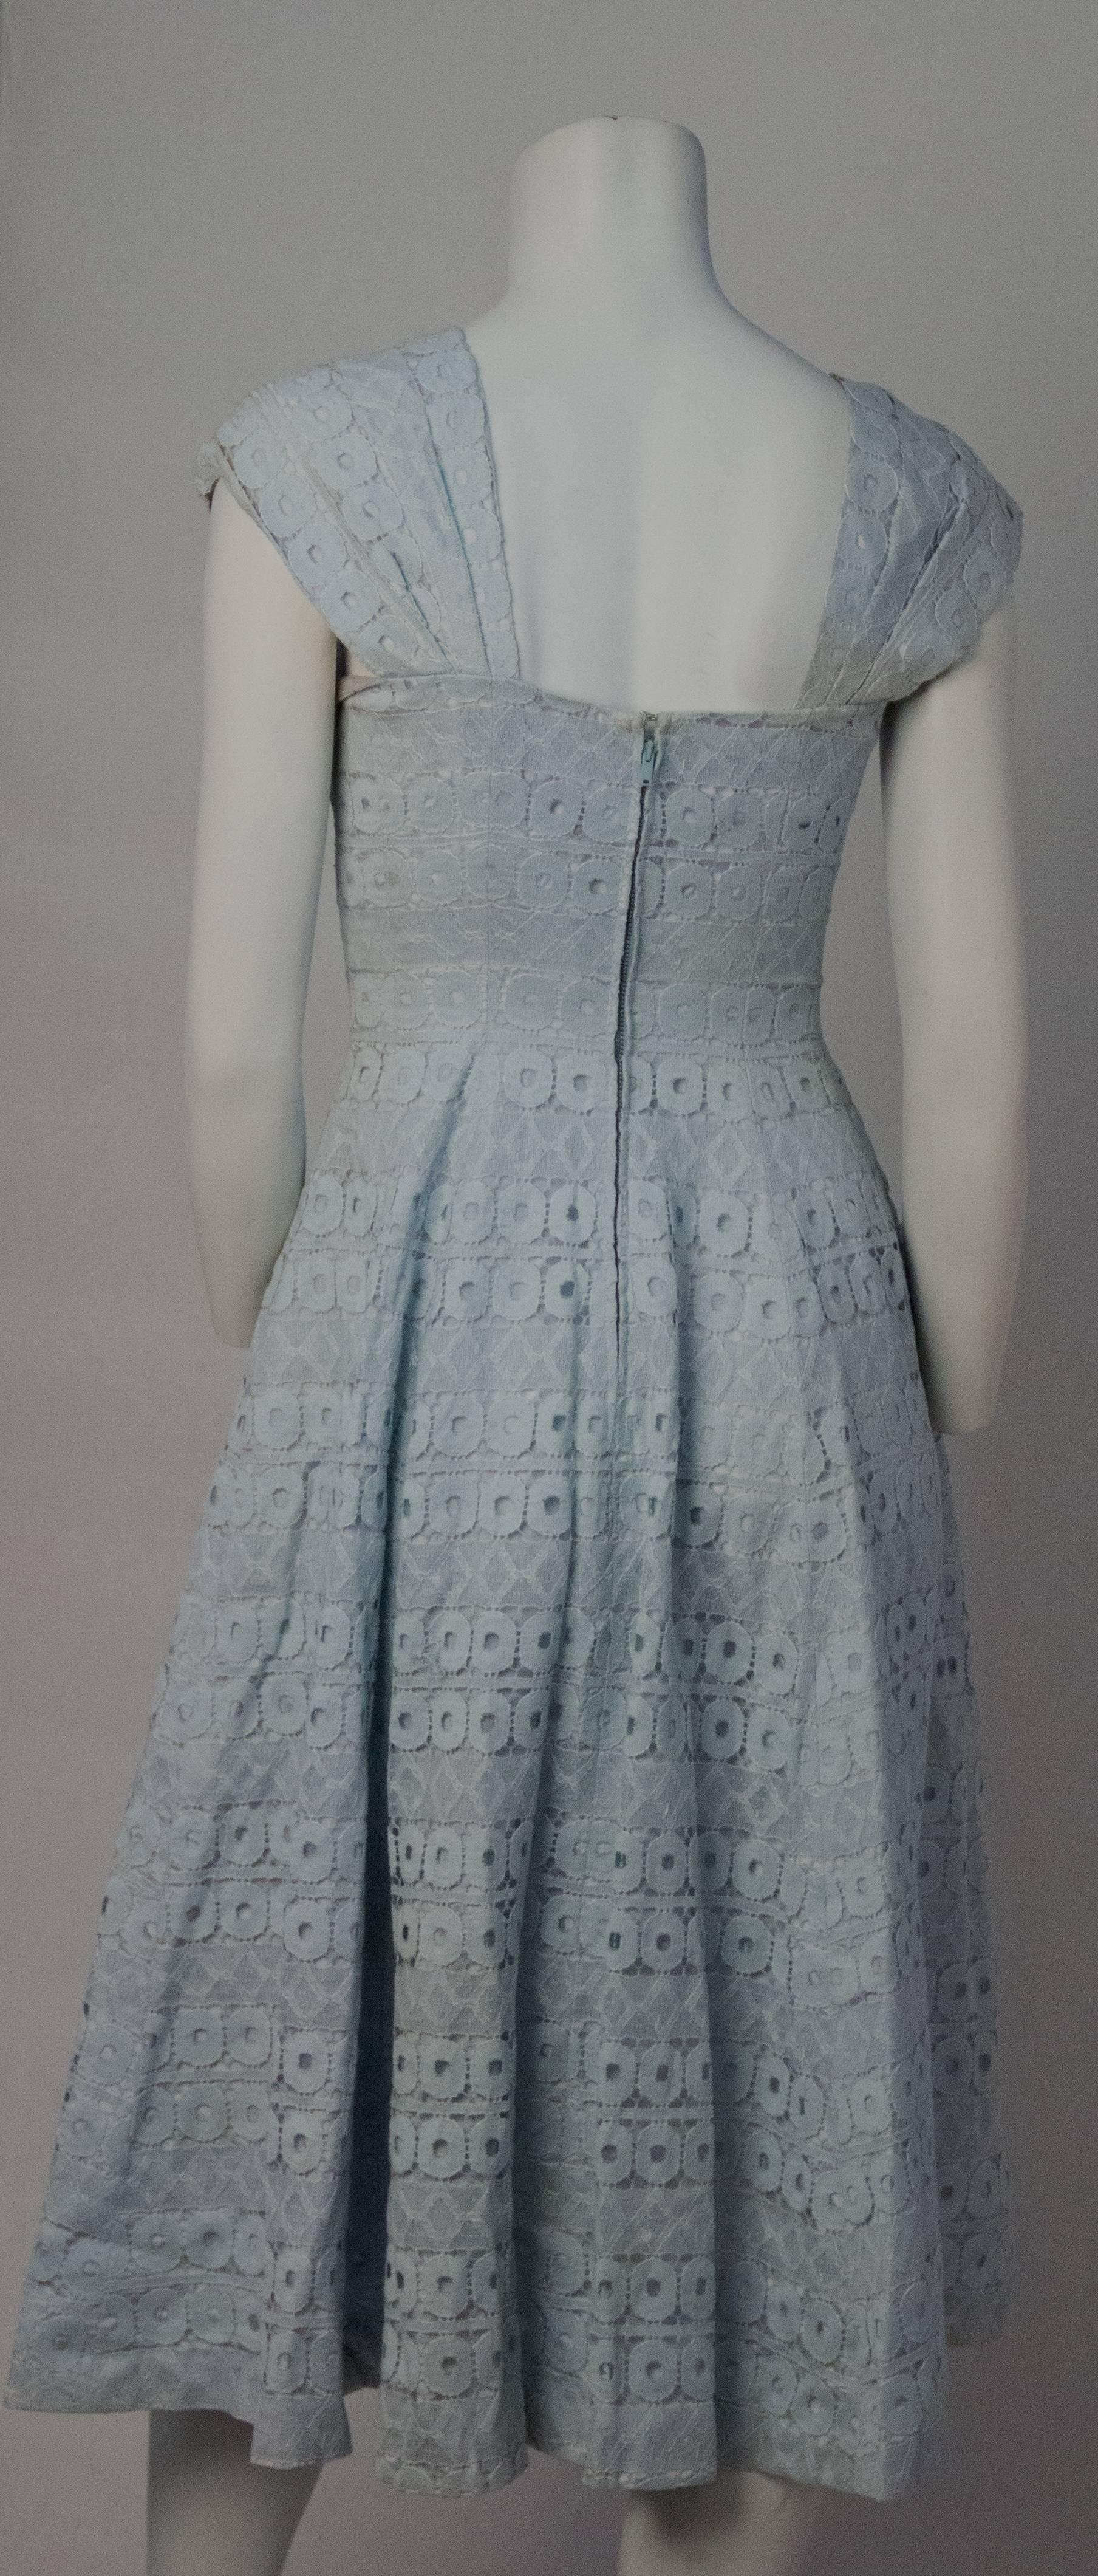 50s Suzy Perret baby blue lace dress. Satin bow detail along front. Metal zipper up the back. Fully lined.  